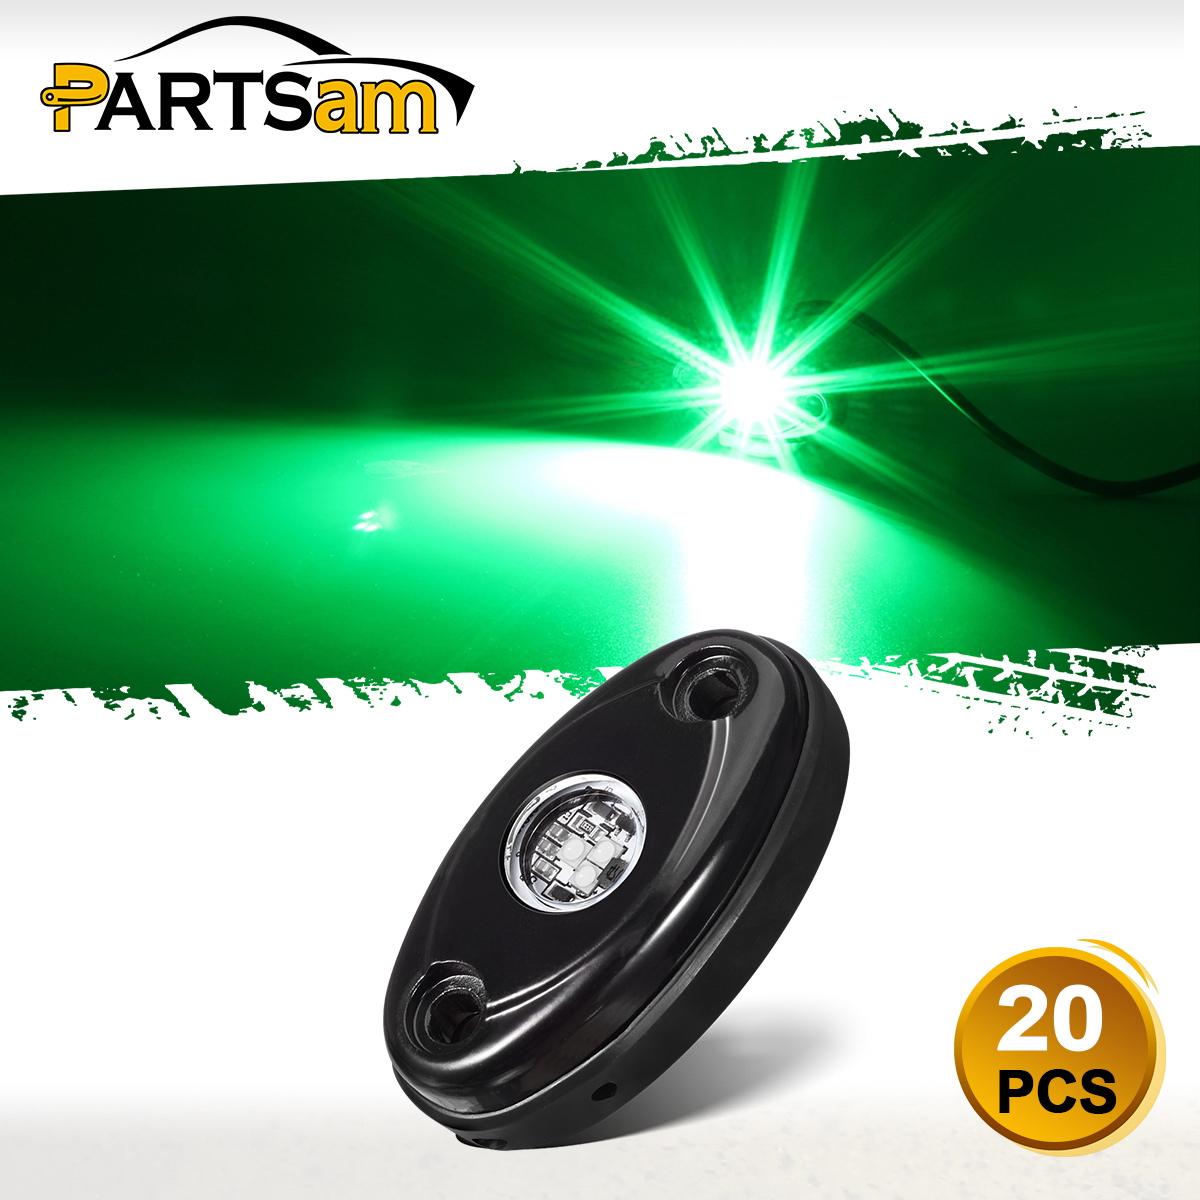 20 Green 9W LED Rock Light kit for JEEP Offroad Truck Under Body Trail Rig Light